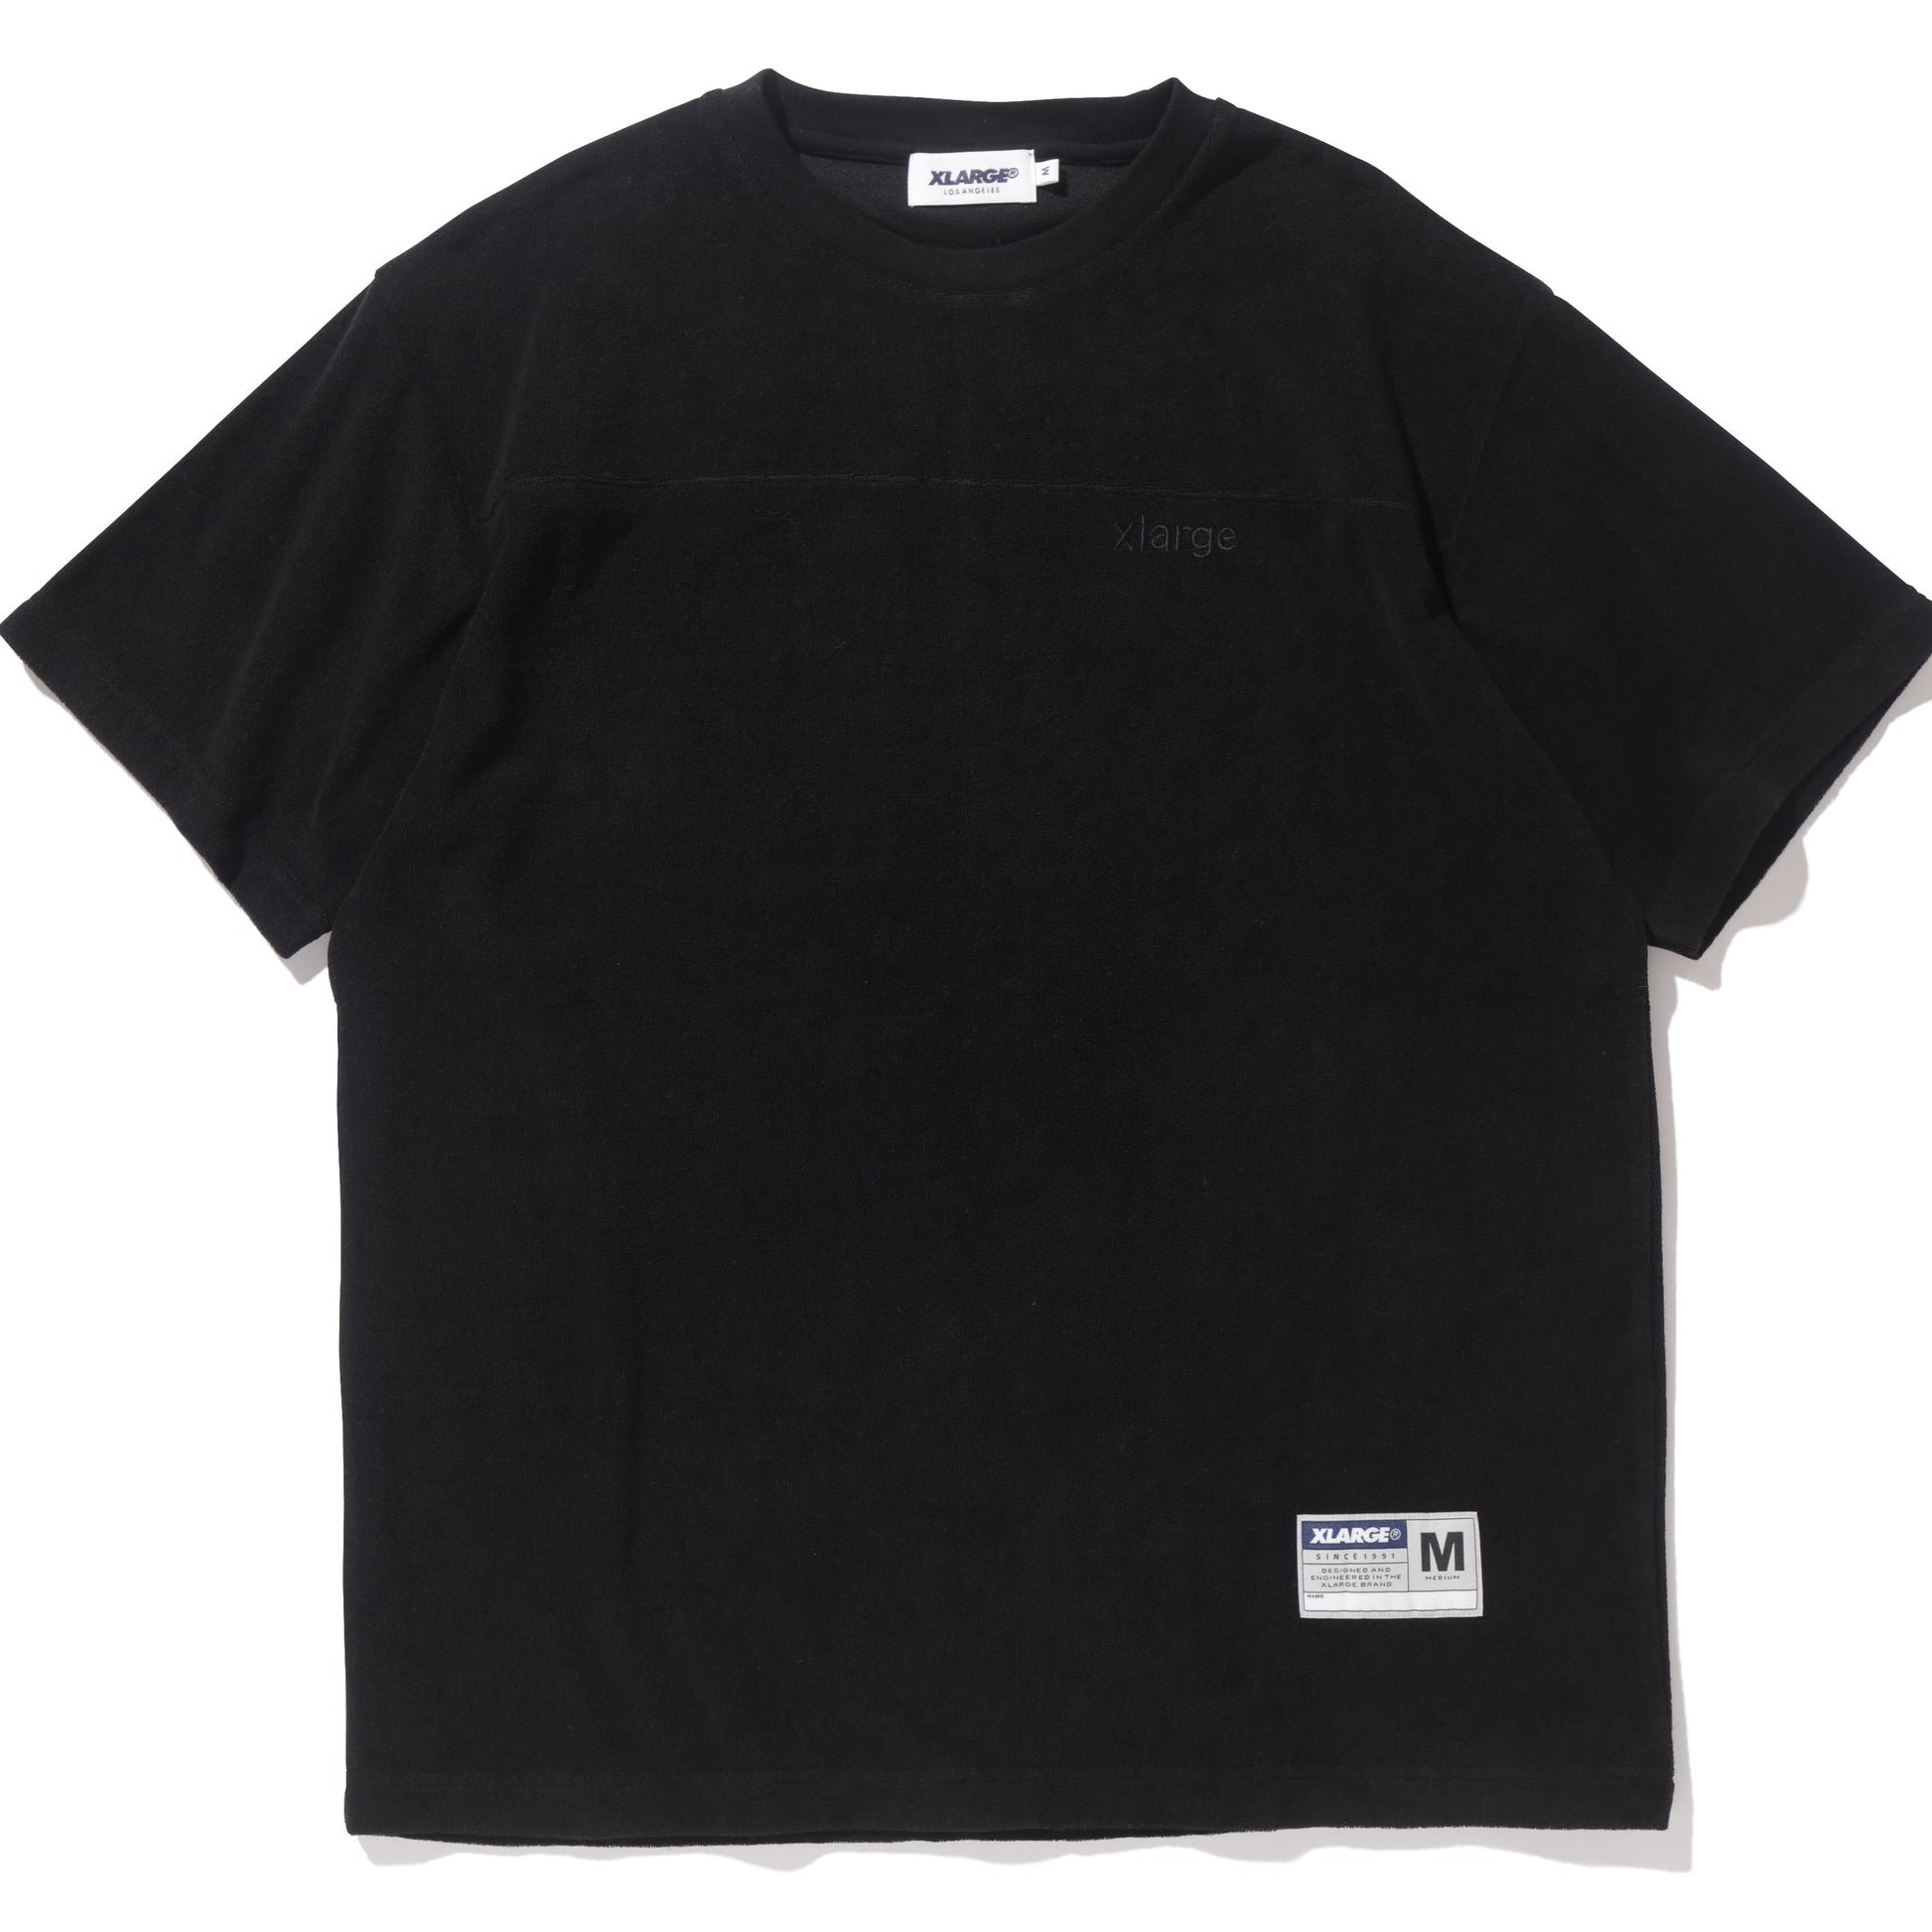 TERRY FOOTBALL S/S SHIRT KNITS XLARGE  